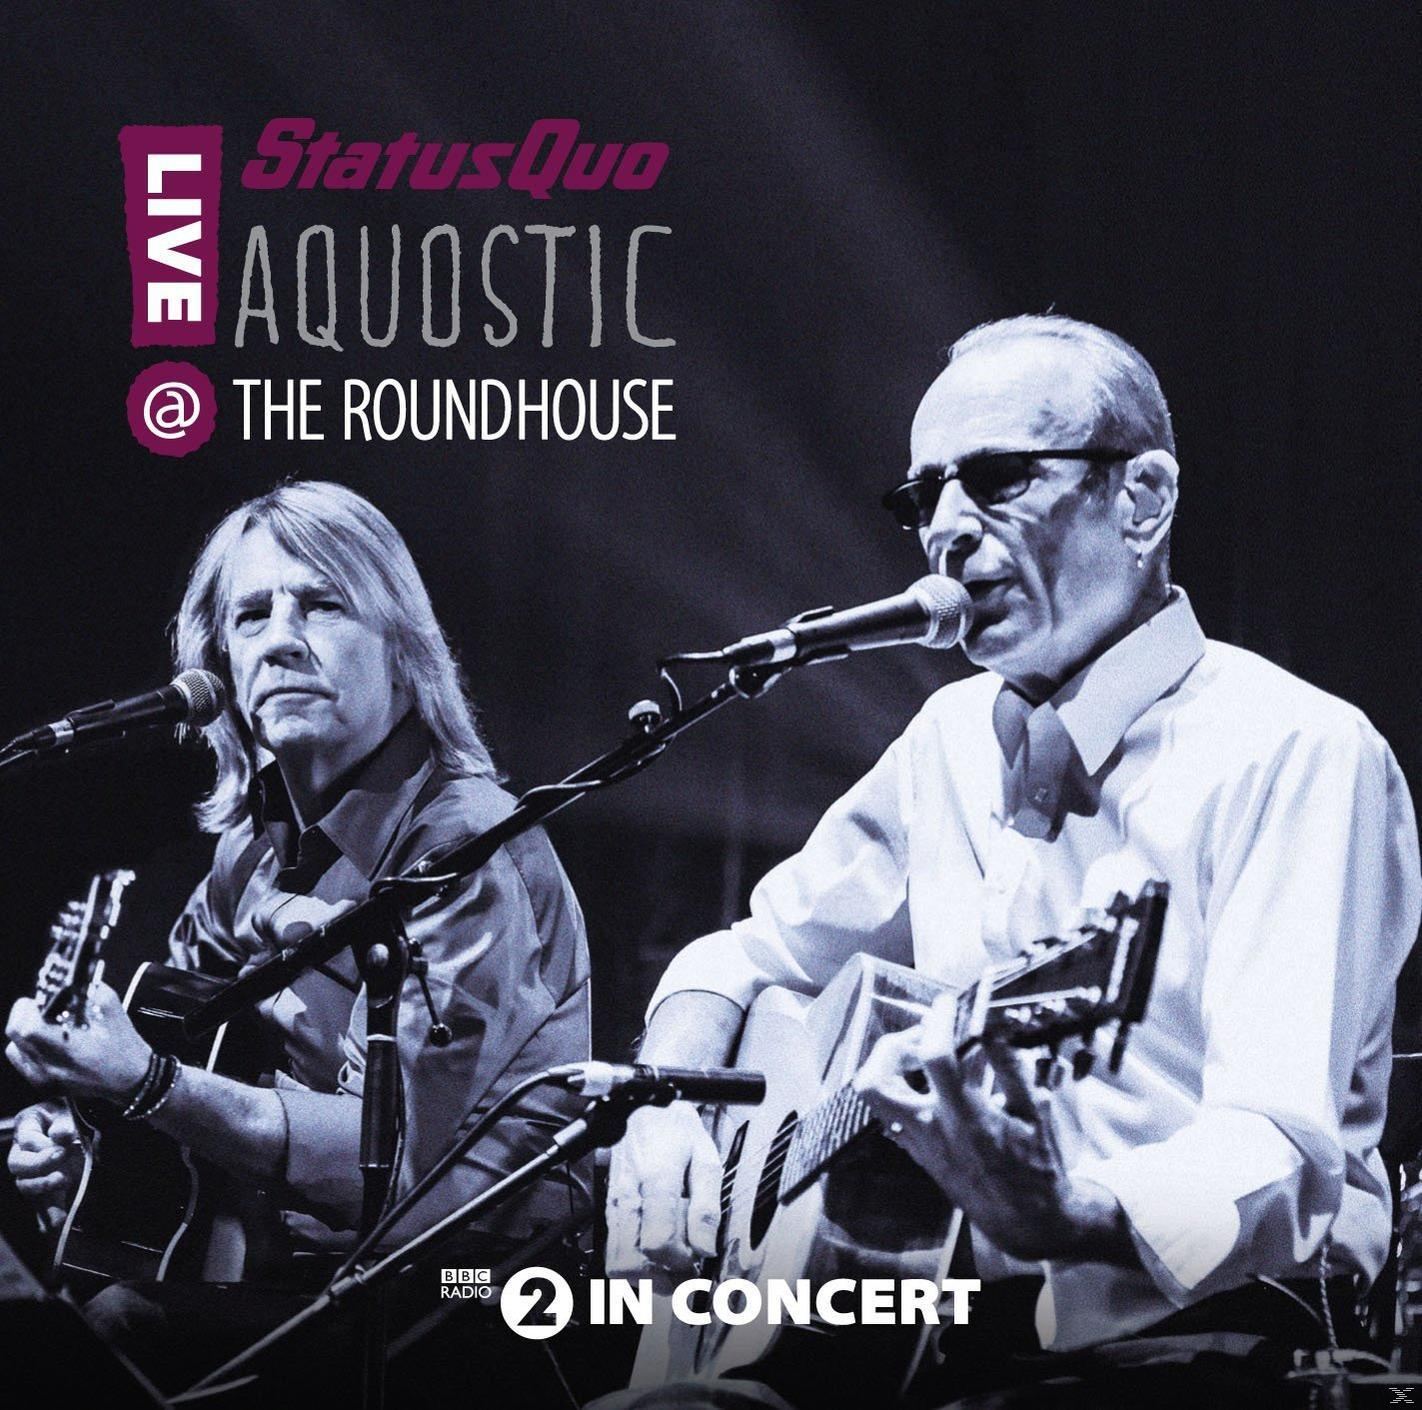 - (CD) At Roundhouse Quo Aquostic! The - Status Live